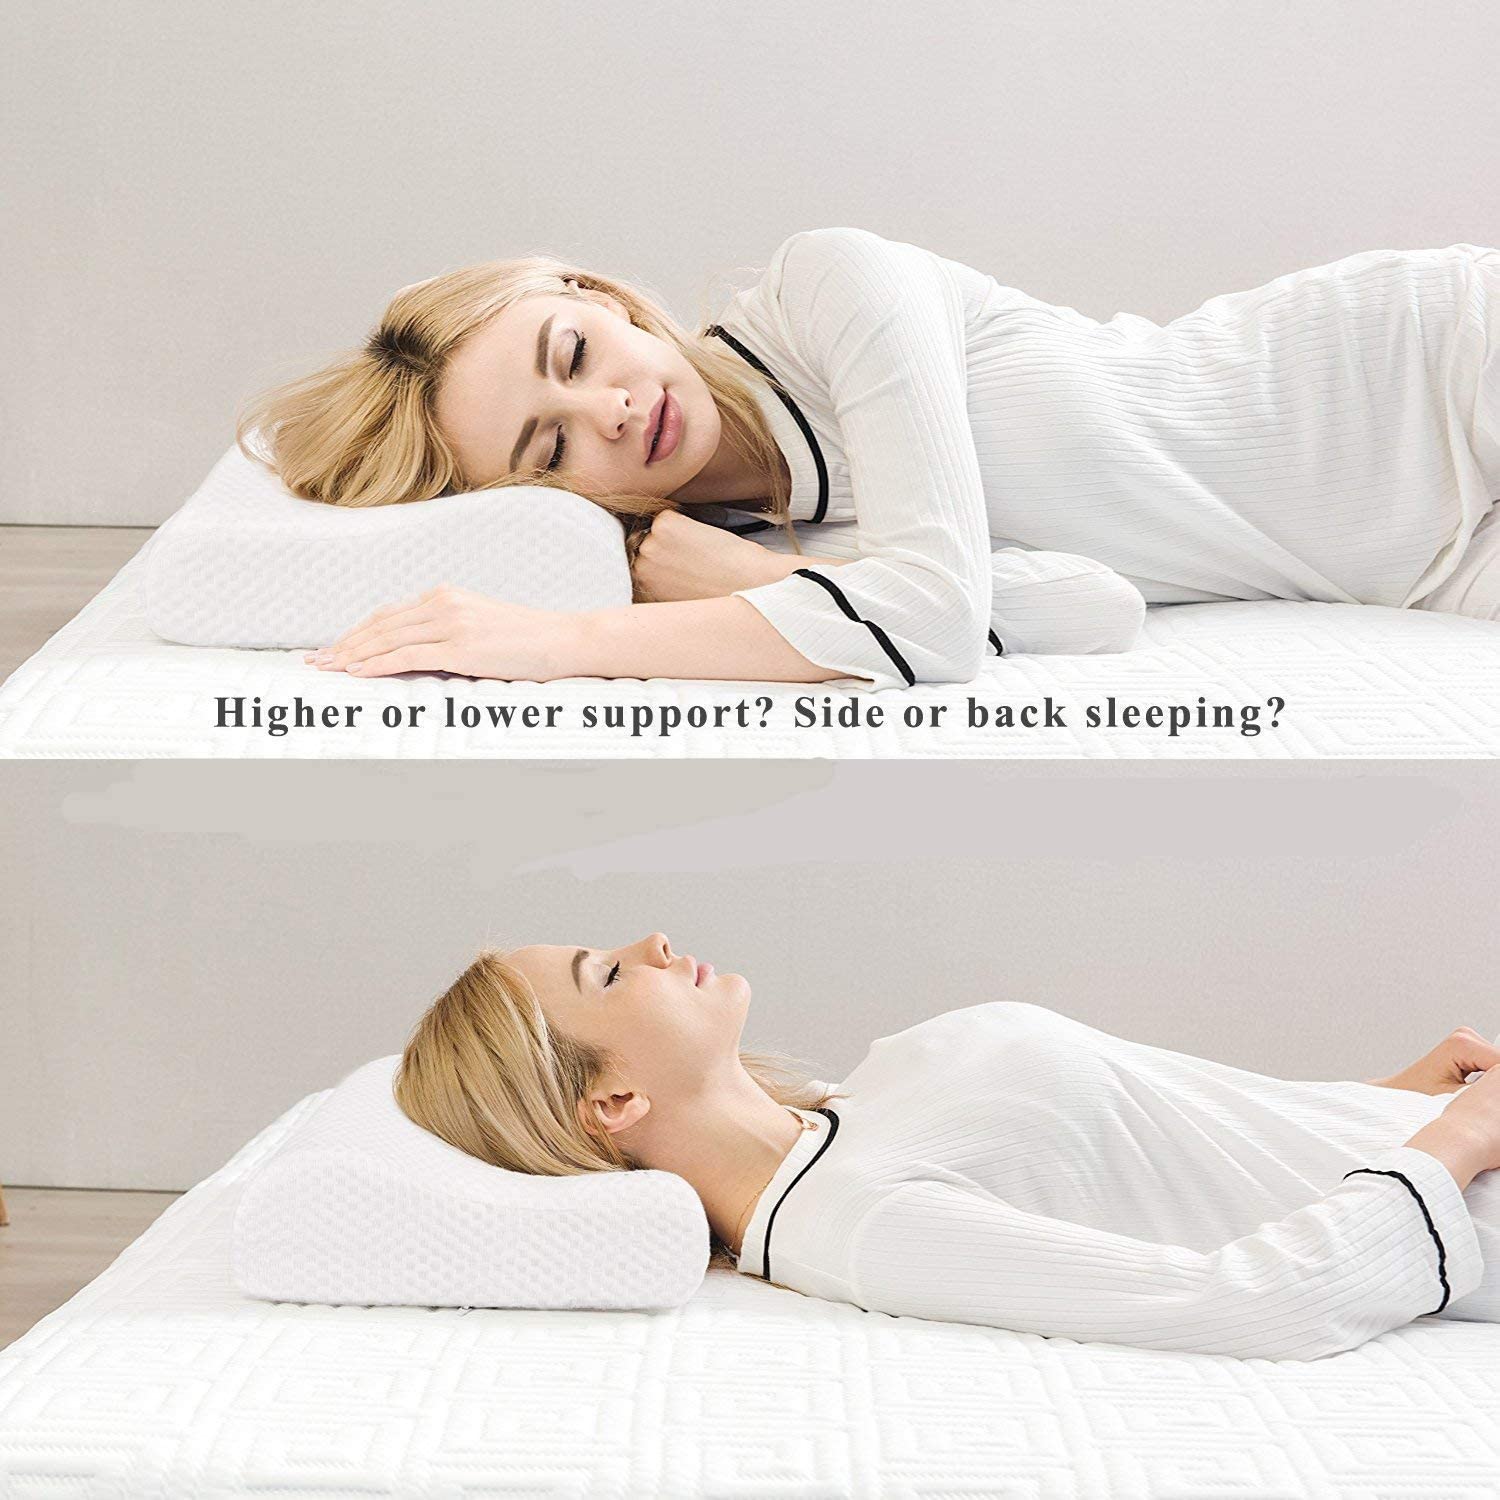 VIO Memory Foam Soft Pillow for Neck and Back Support Pillow Cervical Pillow for Neck Pain with Removable Zipper Cover